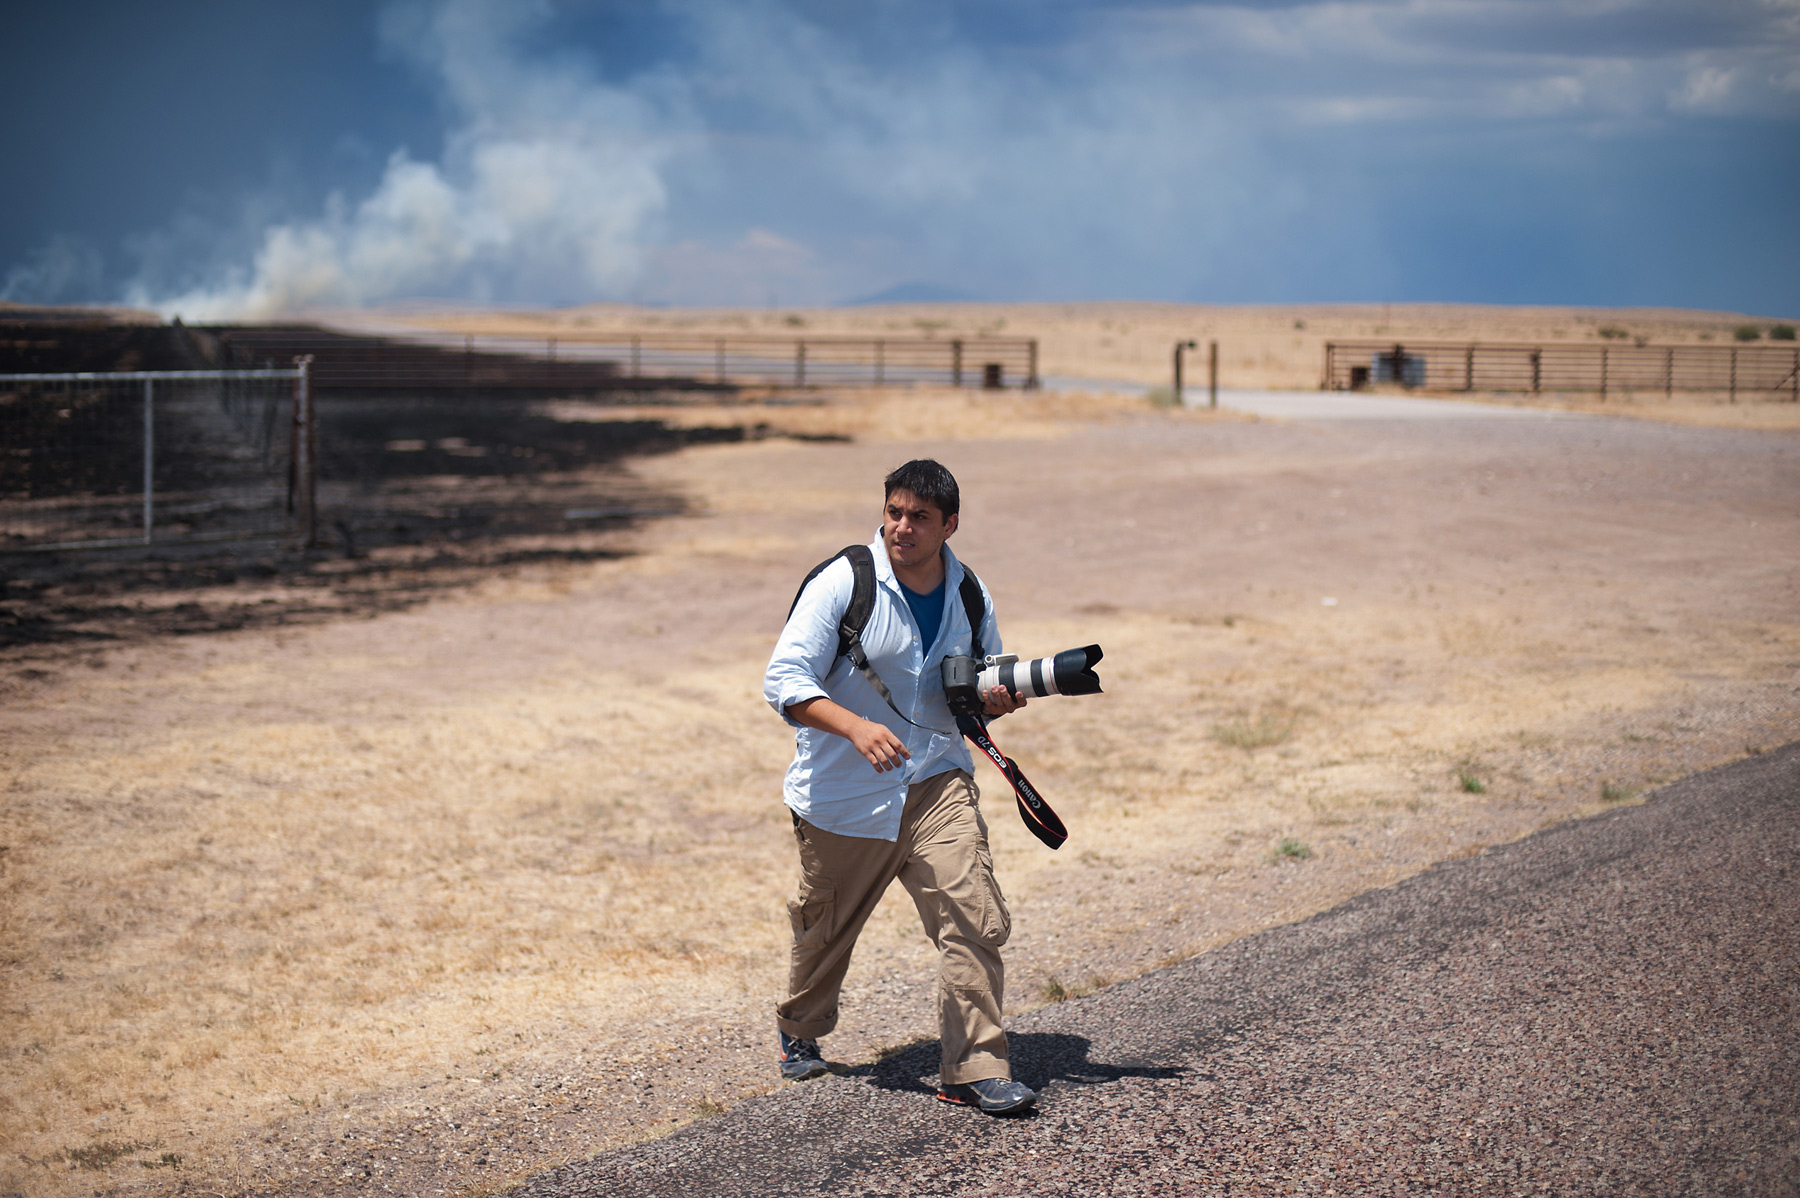 JoshuaBright_Town&Country_Deadline_WeeklyPaper_TheBigBendSentinel_Marfa_Texas_photojournalist_color